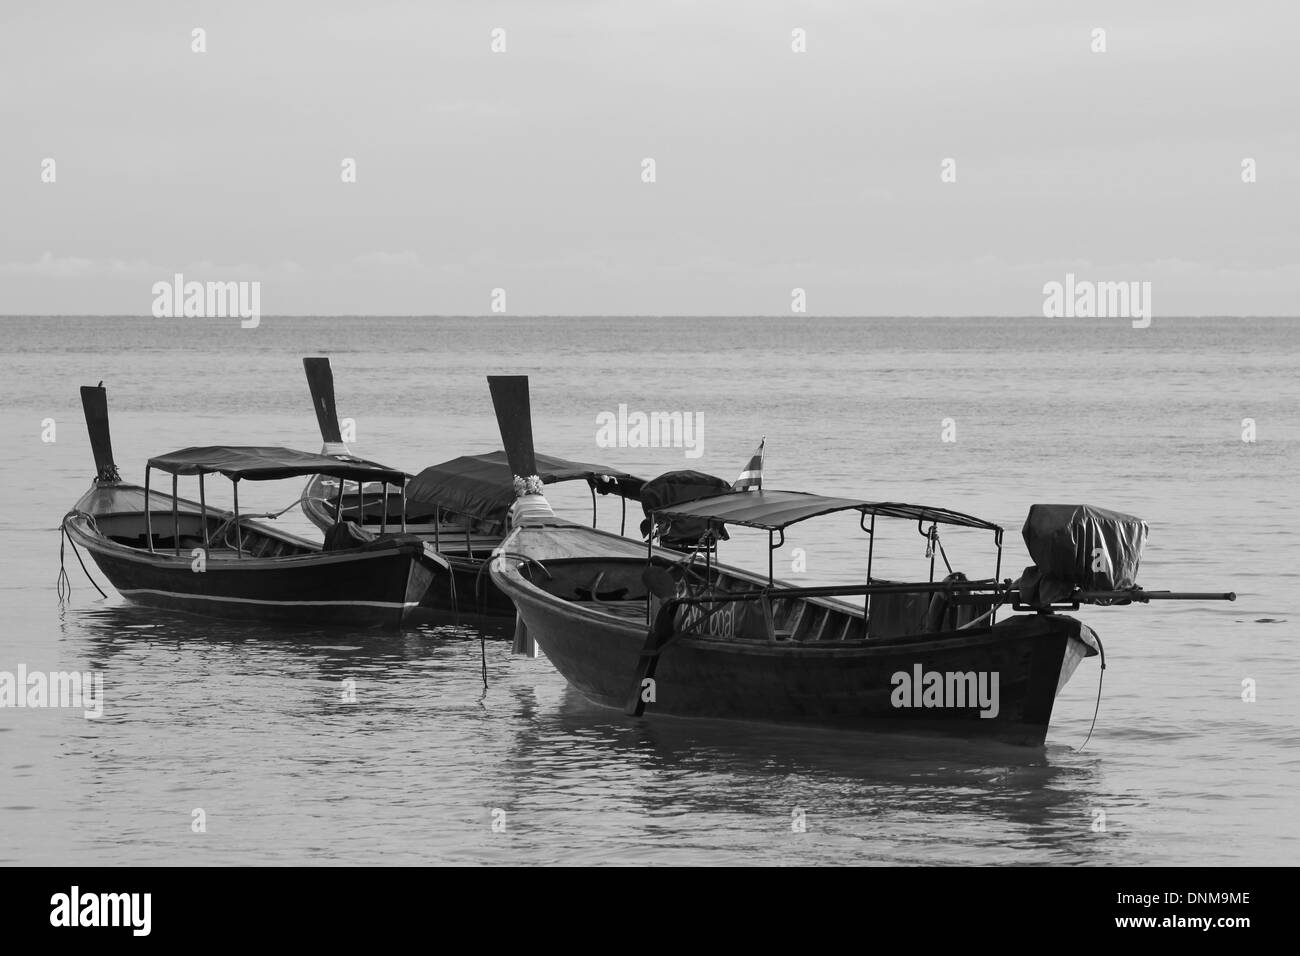 A black and white photograph of some longtail boats in Thailand against a backdrop of a calm sea and horizon. Stock Photo